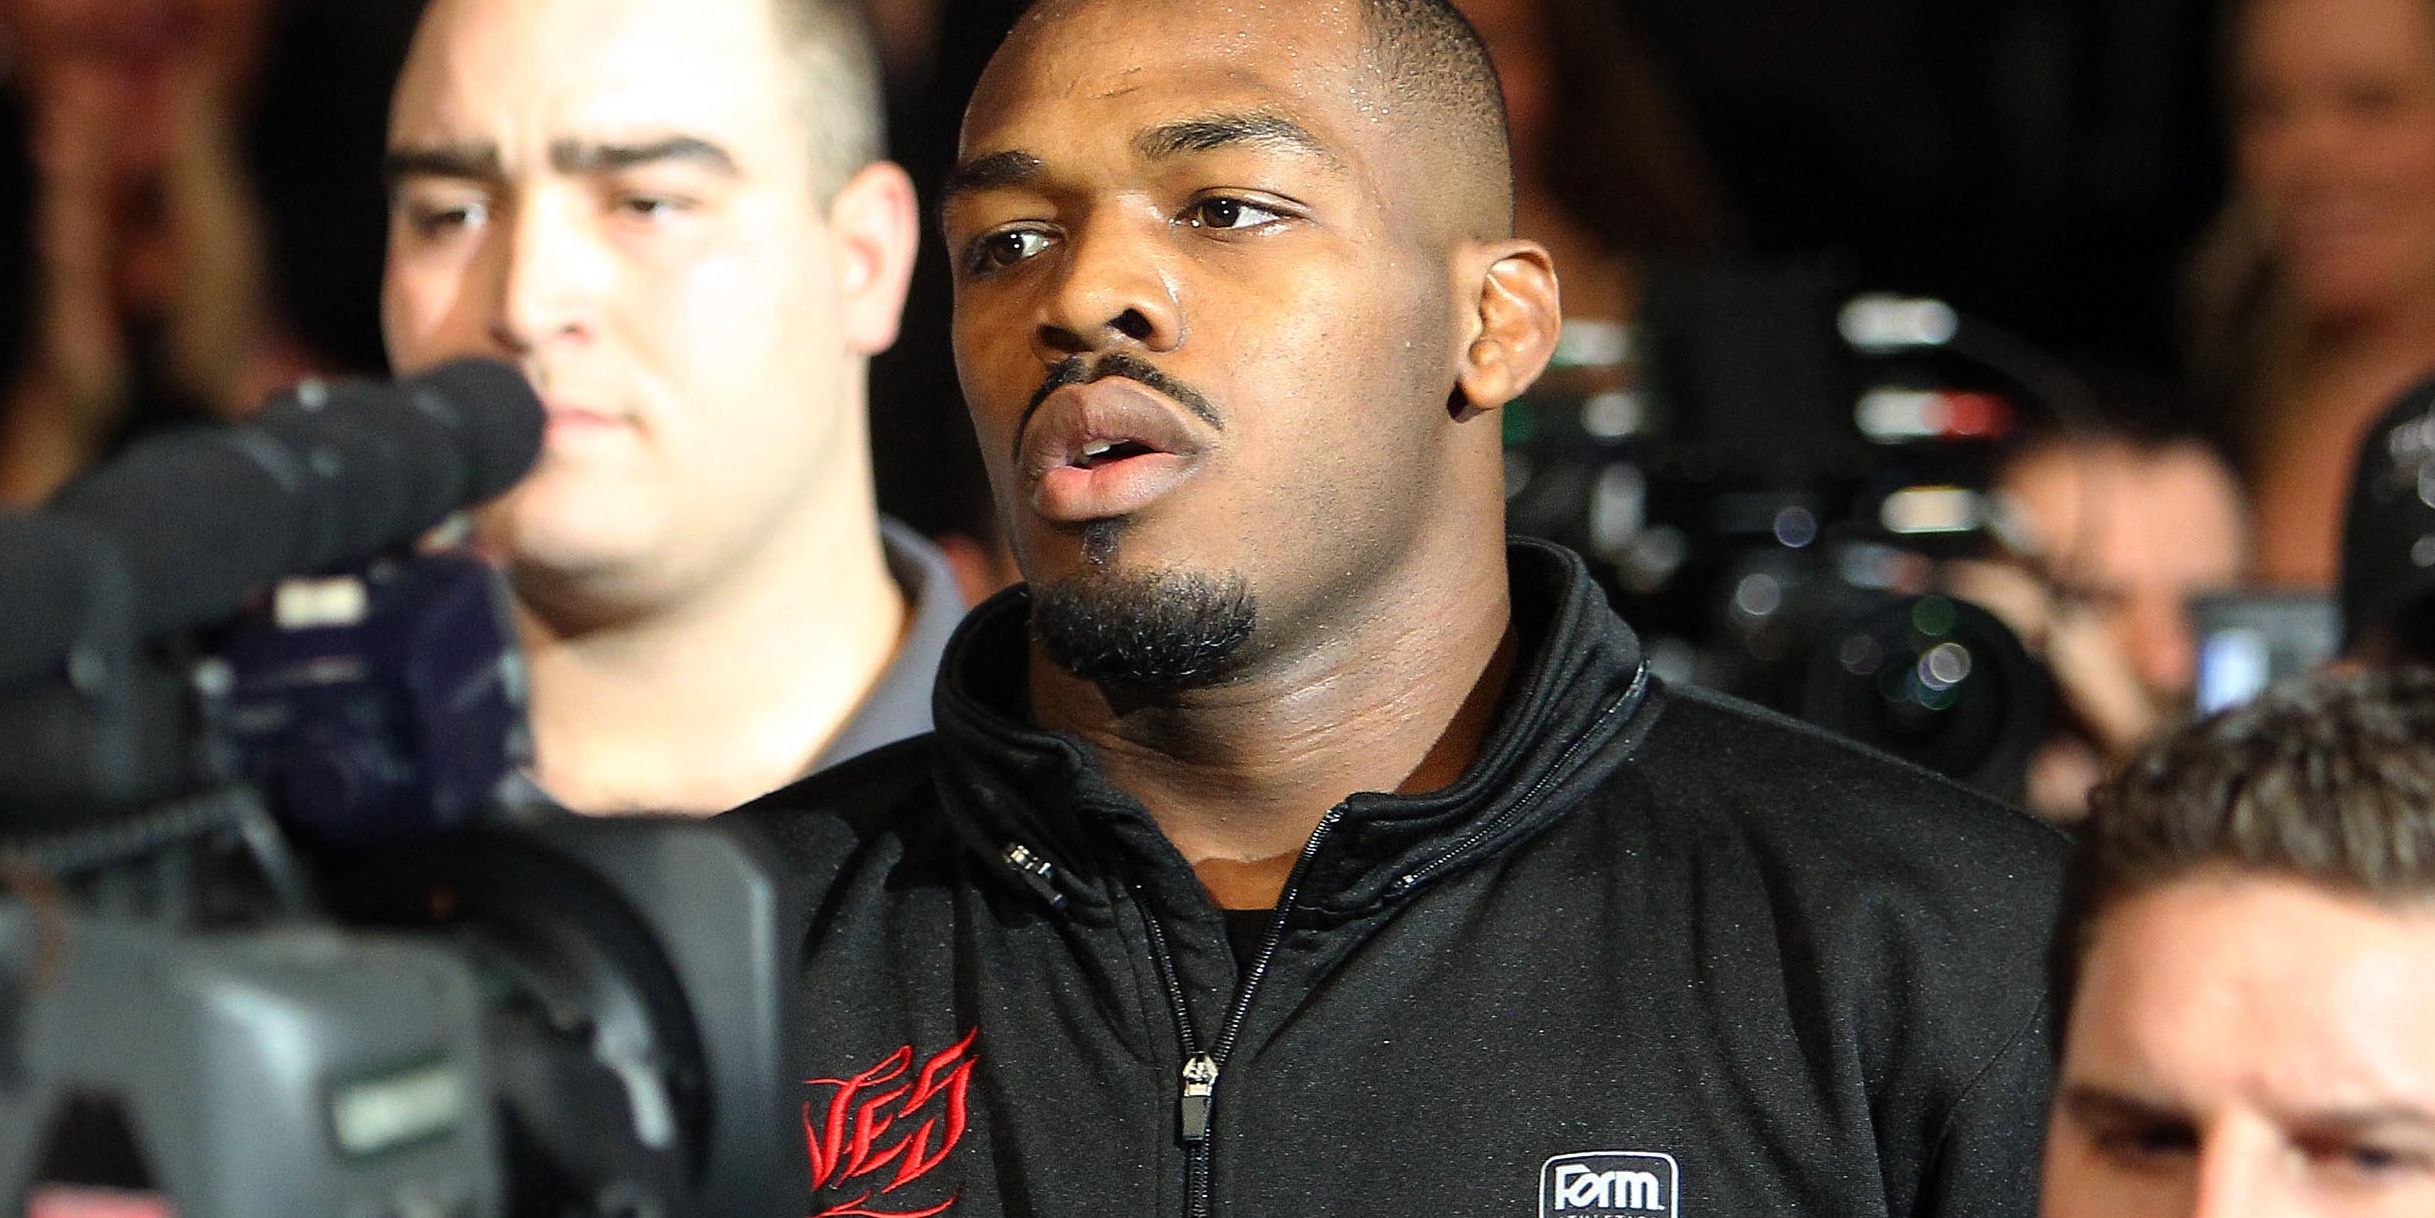 jon-jones-jogging-to-the-cage-in-a-black-jacket